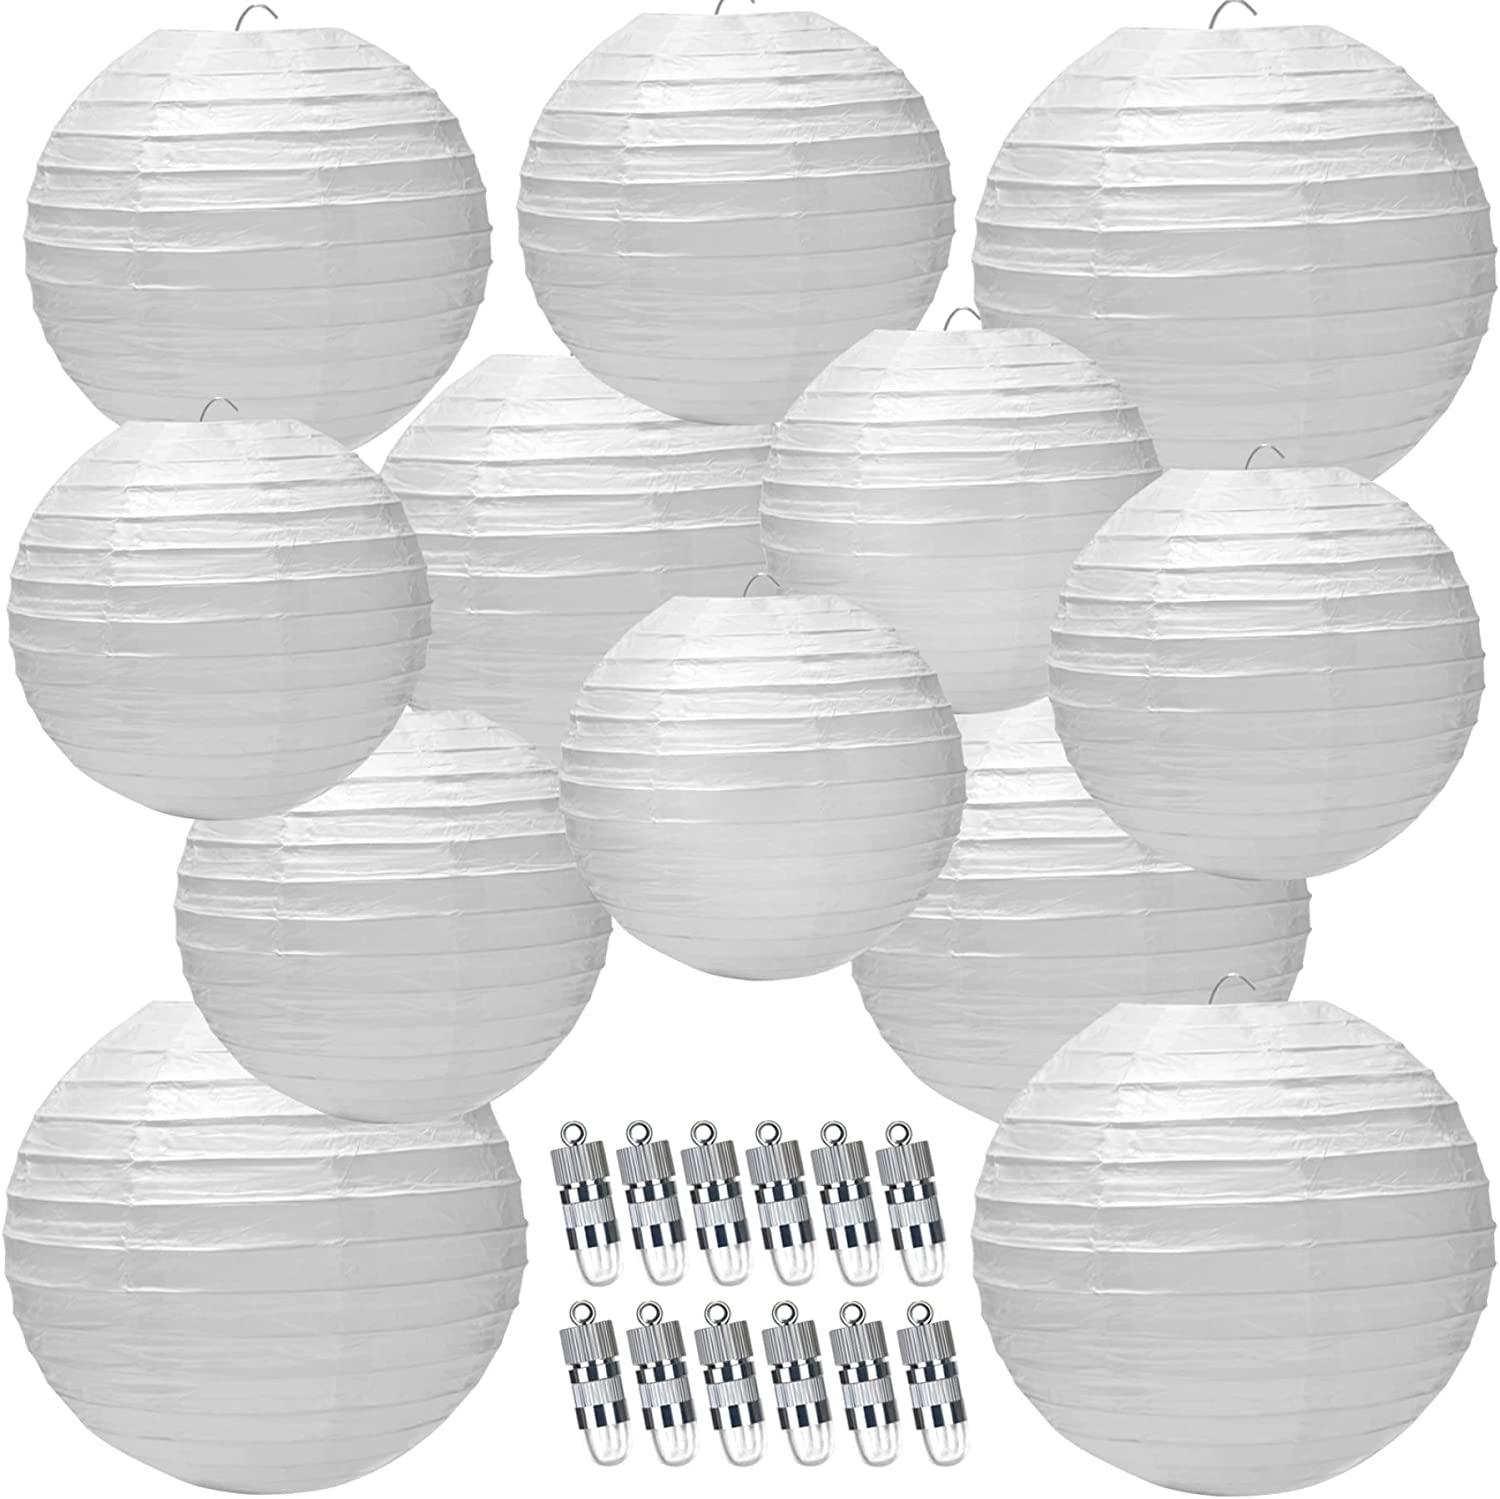 12 Packs LED Paper Lantern with Lights ,6" 8" 10" 12" Round Hanging Chinese/Japanese Ball Lantern for Wedding - Decotree.co Online Shop